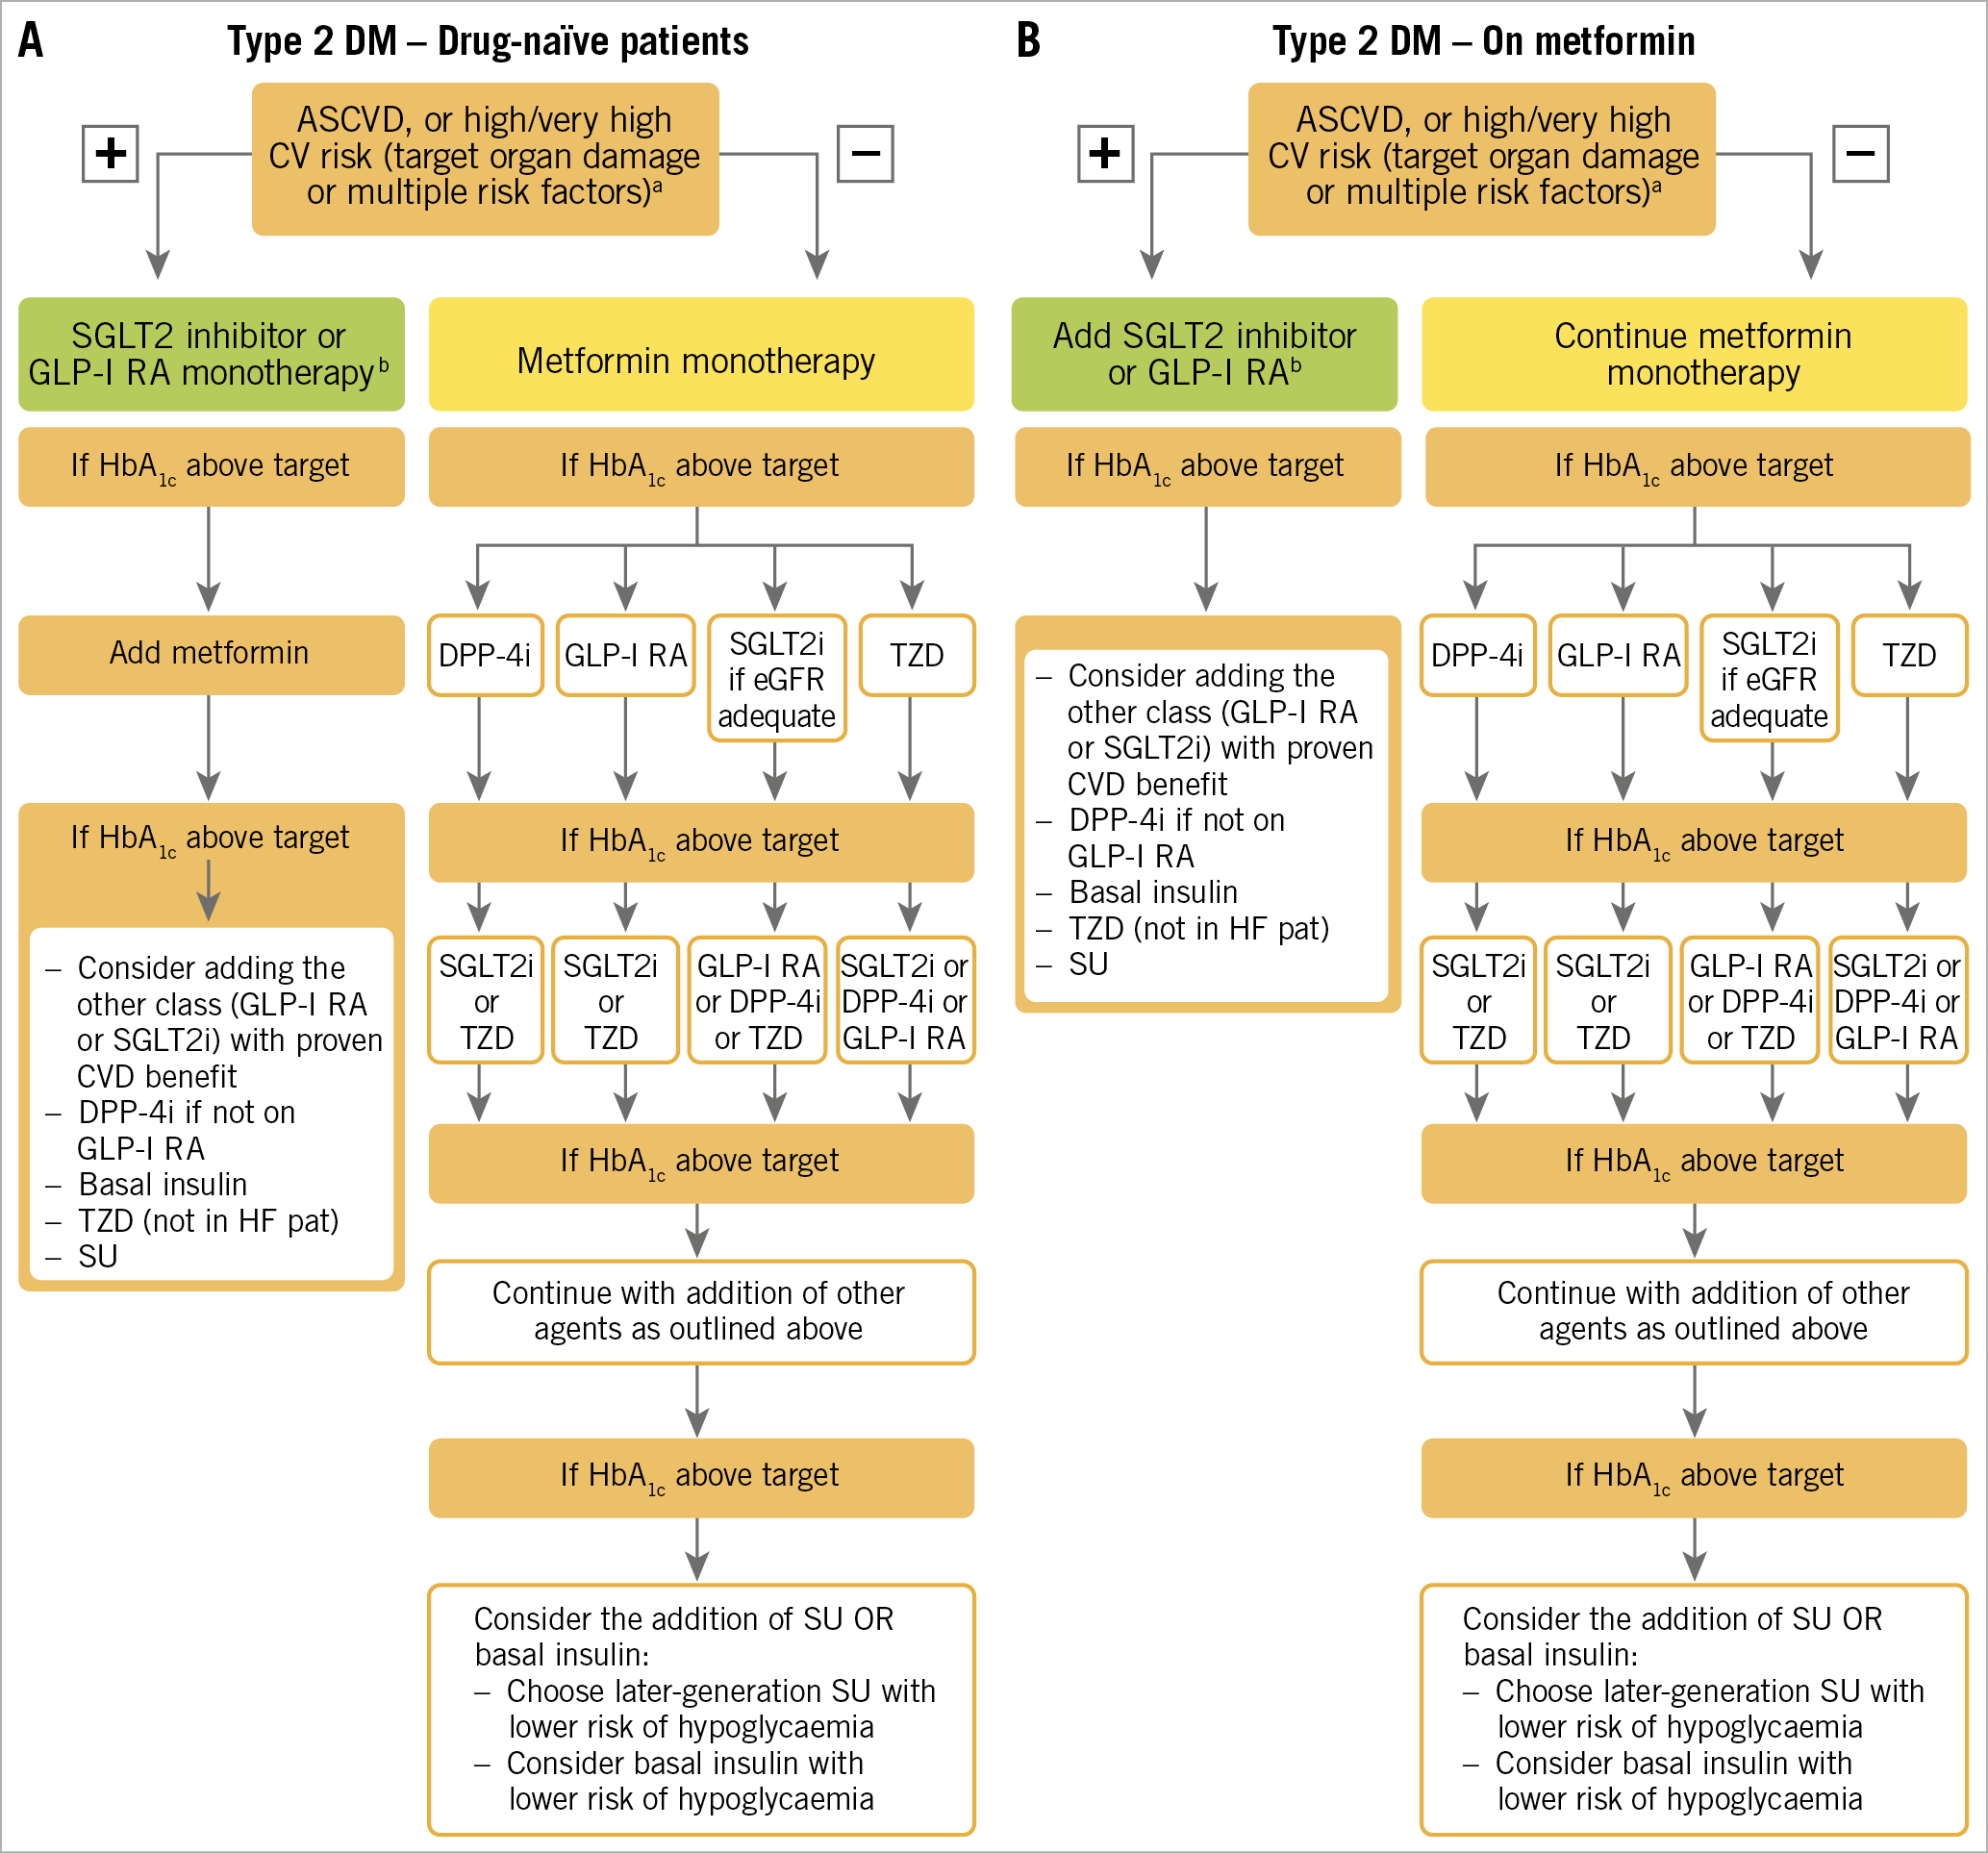 Figure 3. Treatment algorithm in patients with T2DM and ASCVD or high/very high CV risk. A) Drug-naïve patients. B) Metformin-treated patients. Treatment algorithm proposed by the 2019 ESC guidelines on CVD, pre-DM and DM, reproduced from reference 18 with permission from Oxford University Press on behalf of the European Society of Cardiology. ASCVD: atherosclerotic cardiovascular disease; CV: cardiovascular; CVD: cardiovascular disease; DPP4i: dipeptidyl peptidase-4 inhibitor; eGFR: estimated glomerular filtration rate; GLP1-RA: glucagon-like peptide-1 receptor agonist; HbA1c: haemoglobin A1c; SGLT2i: sodium-glucose co-transporter-2 inhibitor; T2DM: type 2 diabetes mellitus; TZD: thiazolidinedion